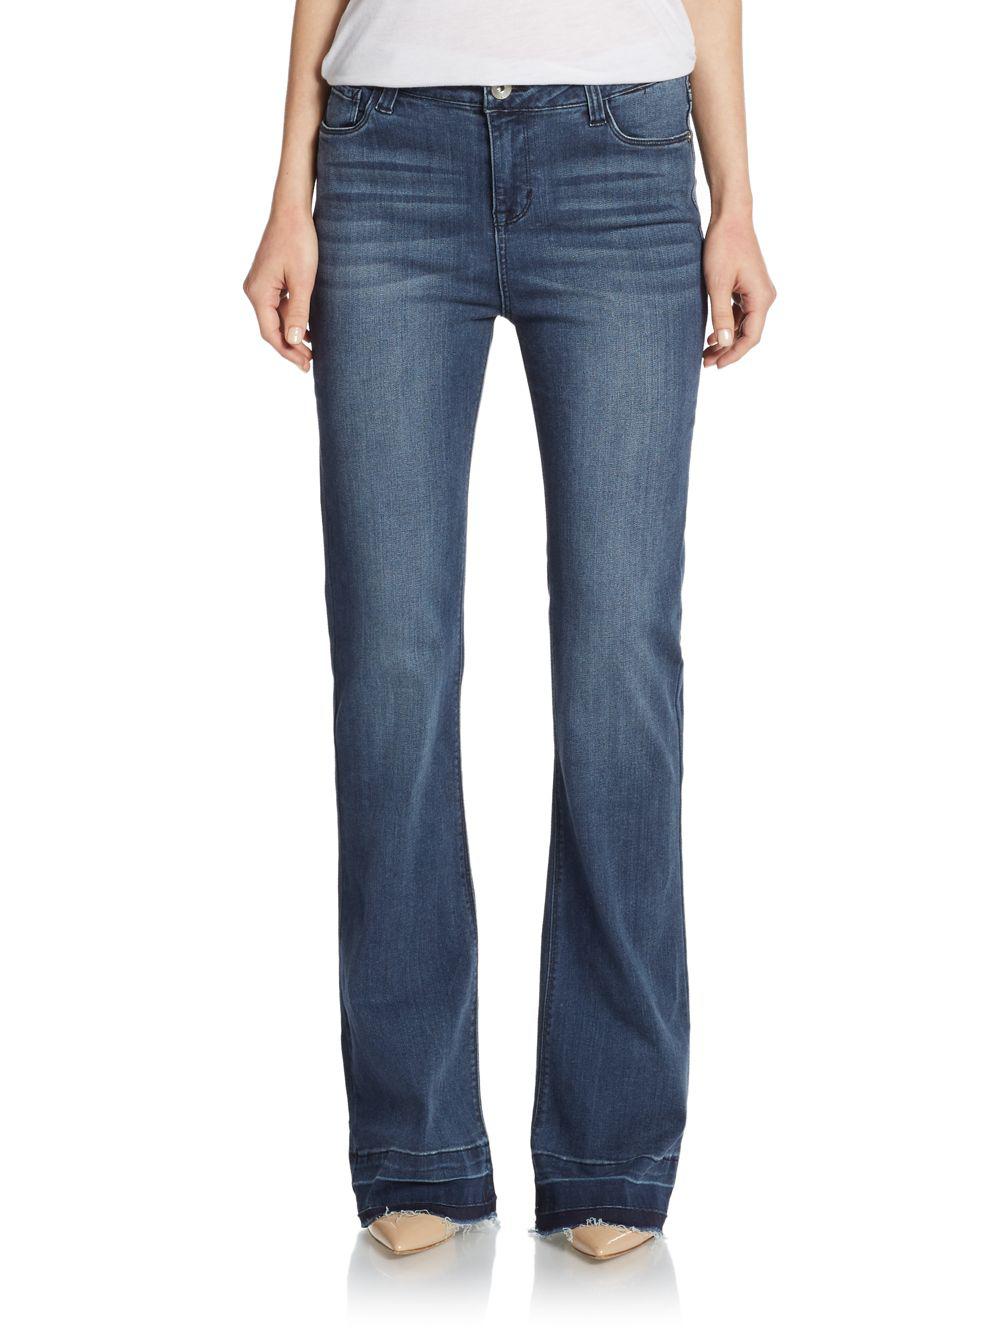 Lyst - Kensie High-rise Flare Jeans in Blue